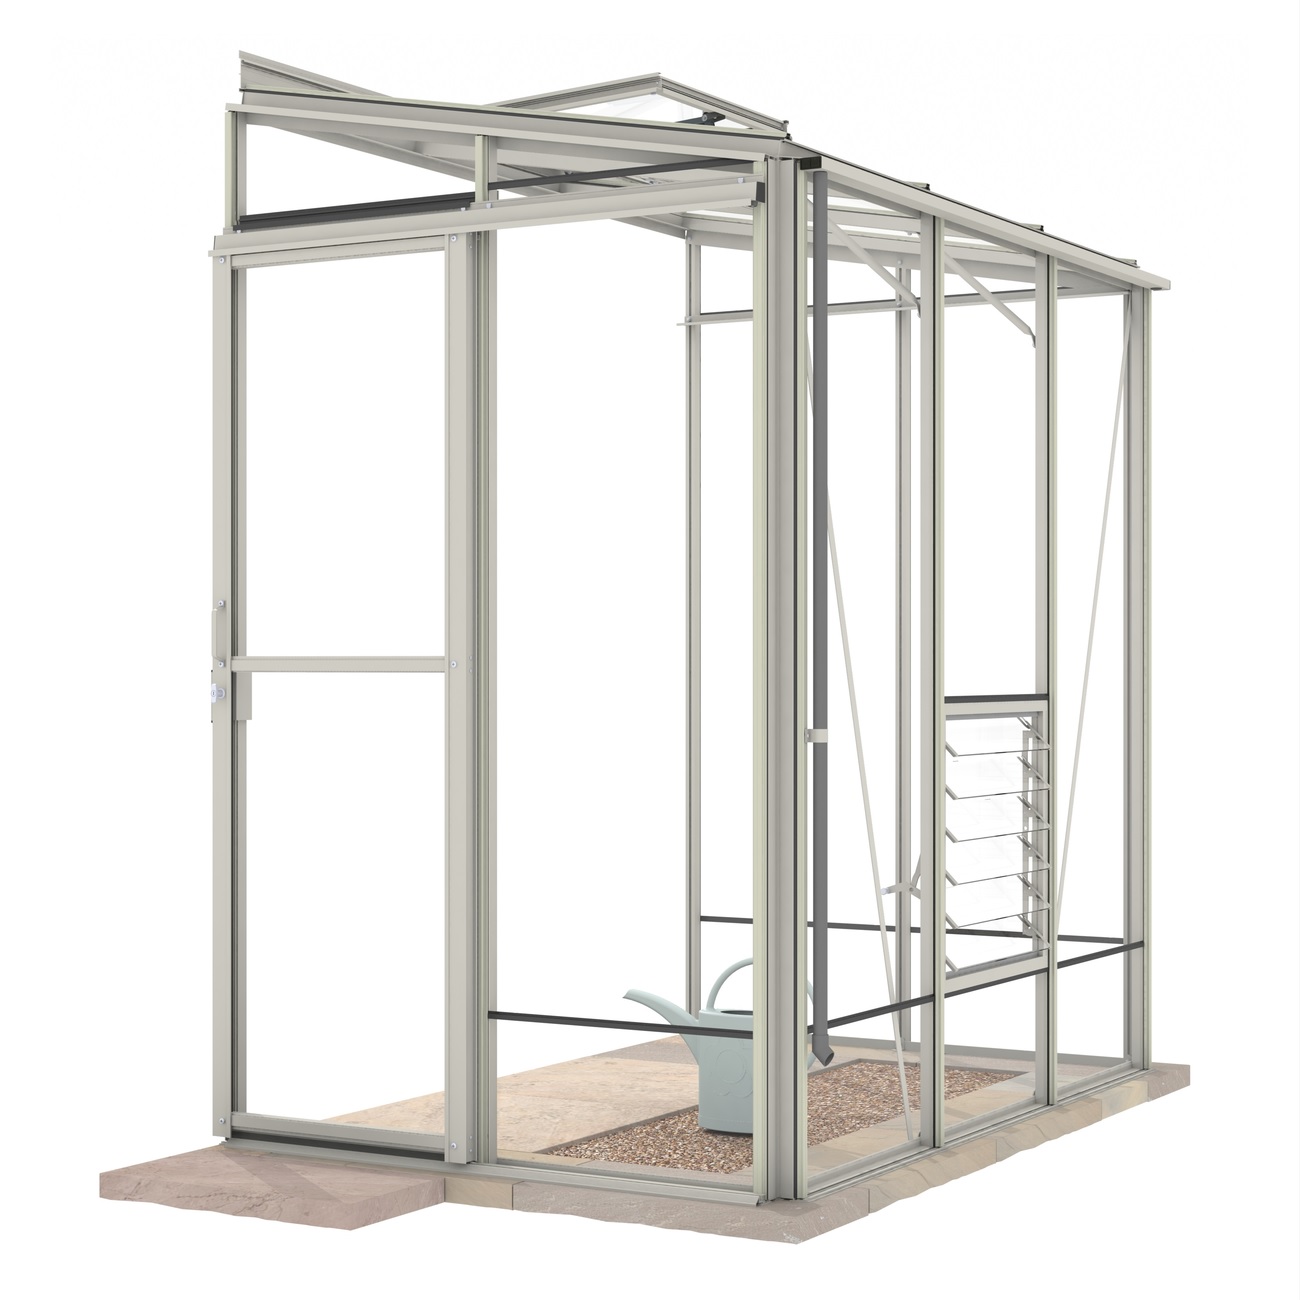 Robinsons 4′ x 6′ Lean To Four Greenhouse